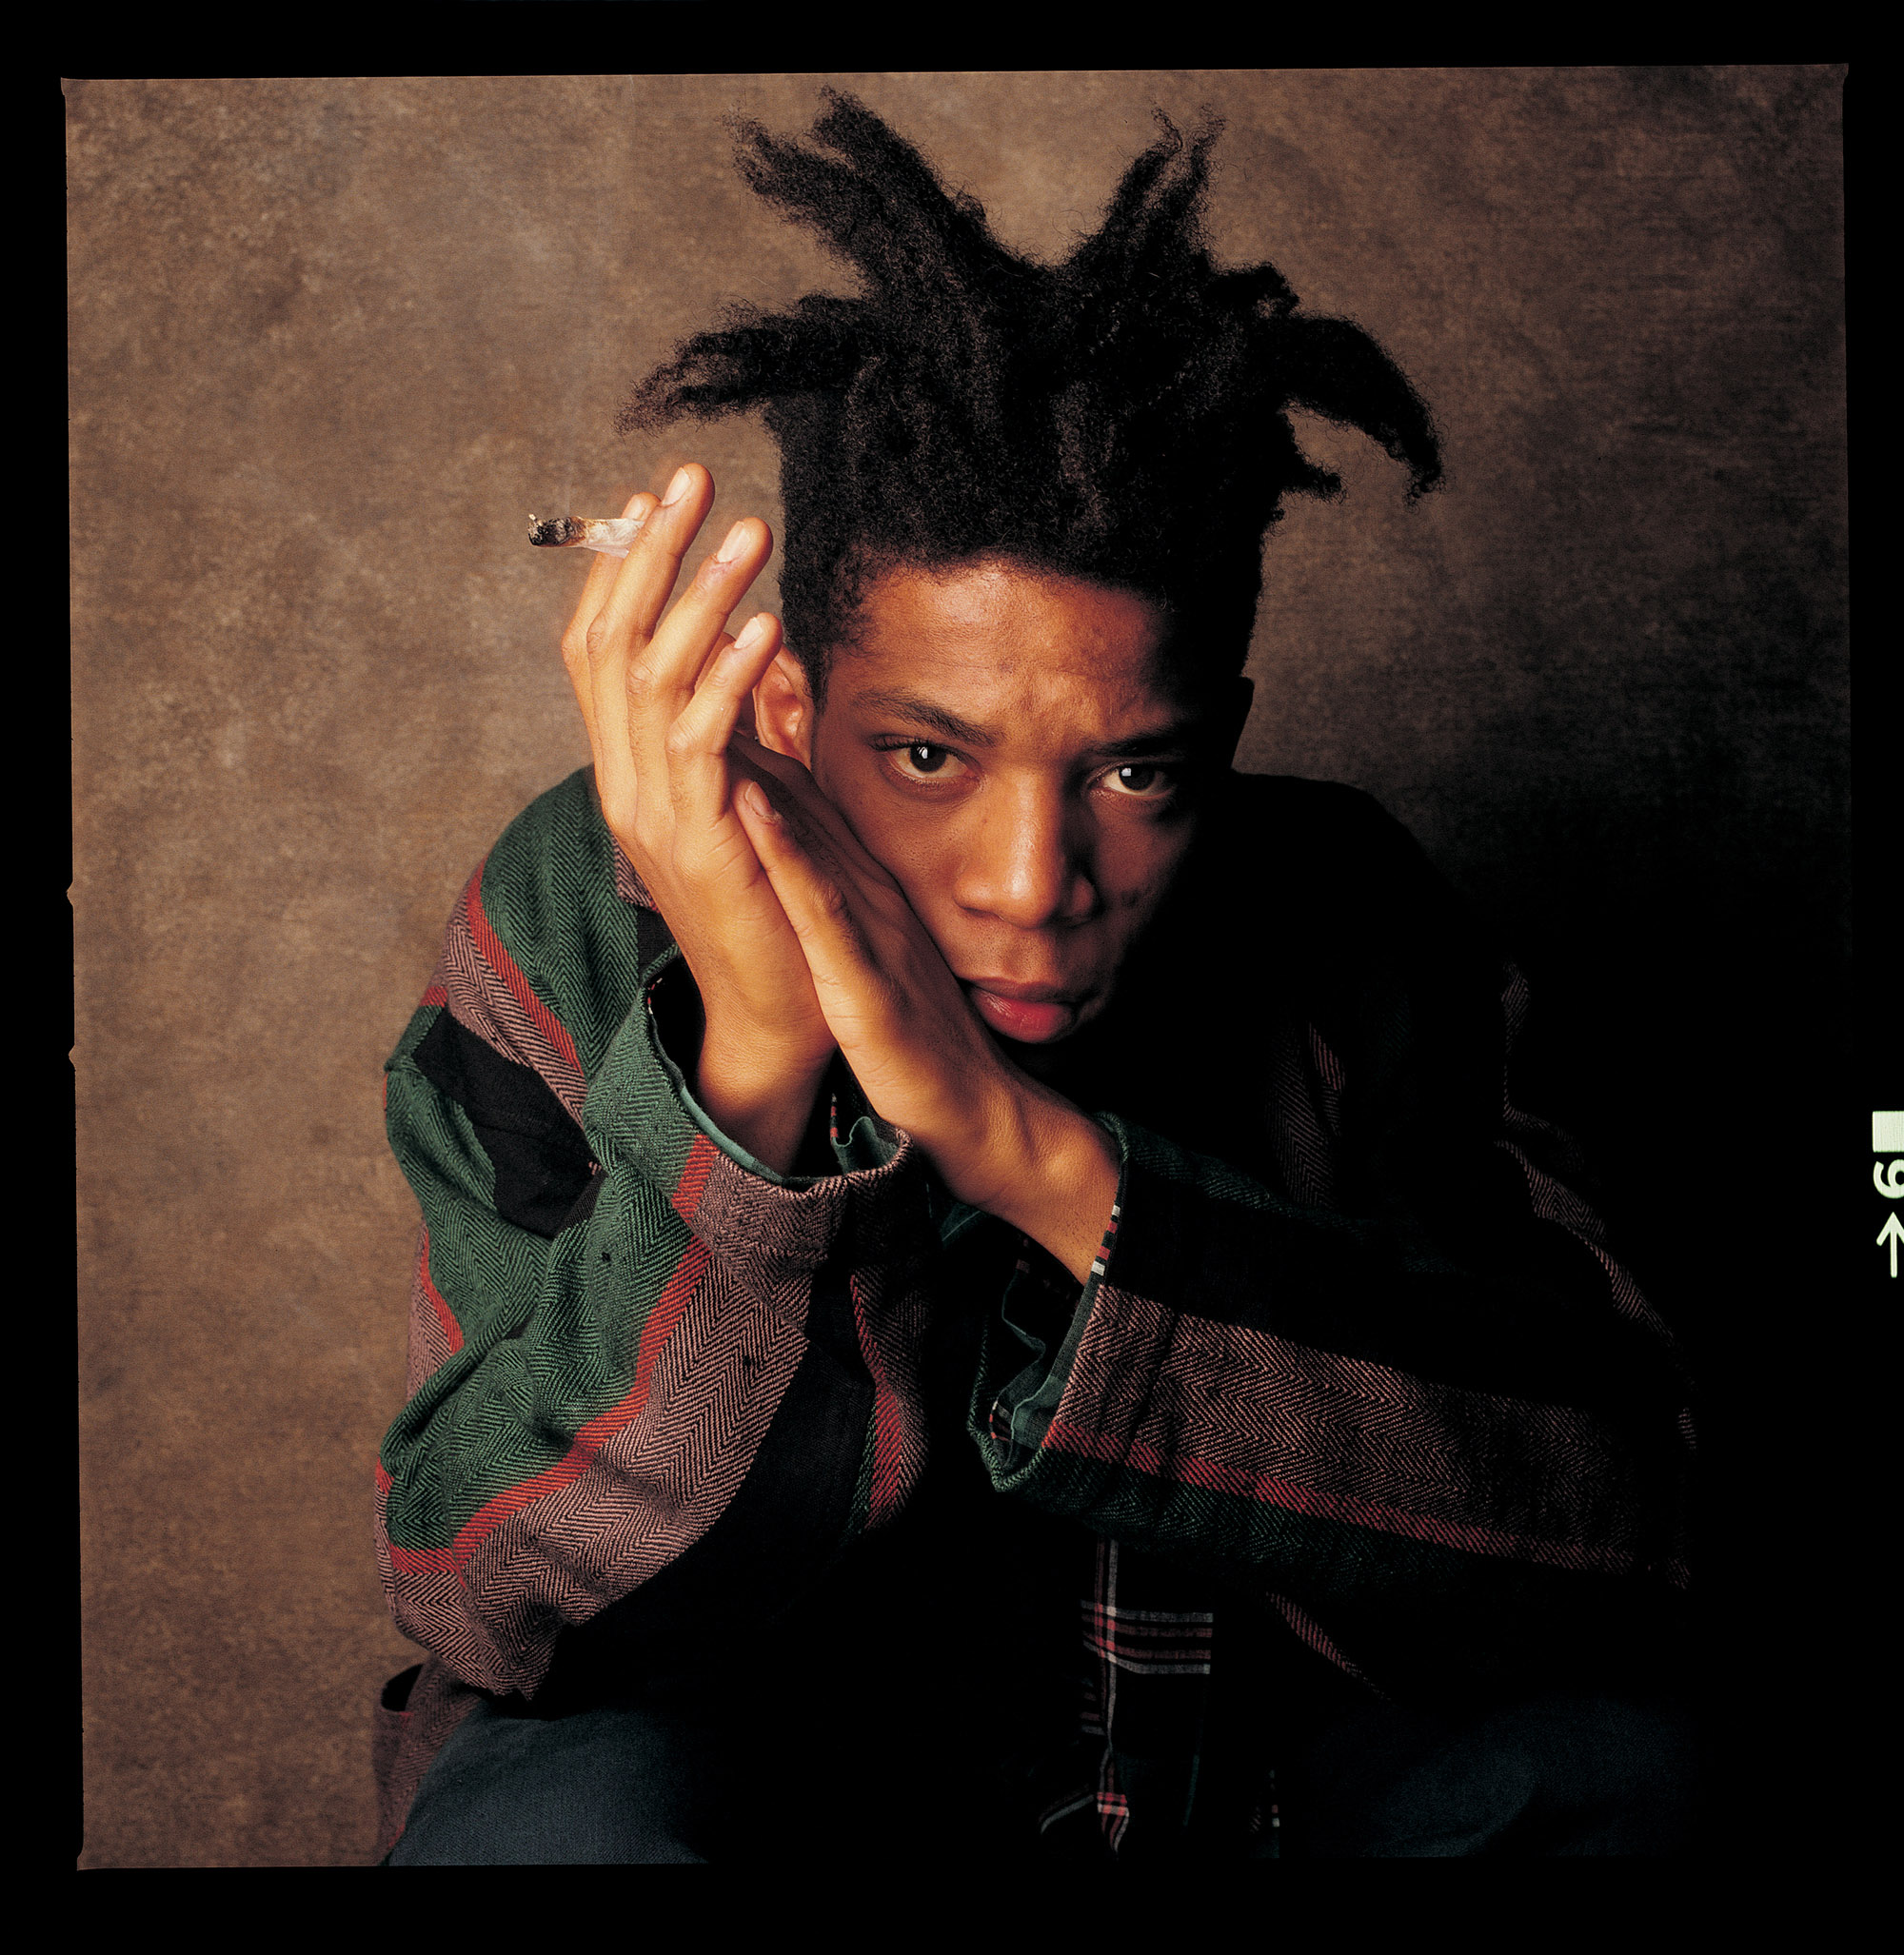 Square colour photograph of artist Jean-Michel-Basquiat leaning forward into hands clasped in front of photograph backdrop.